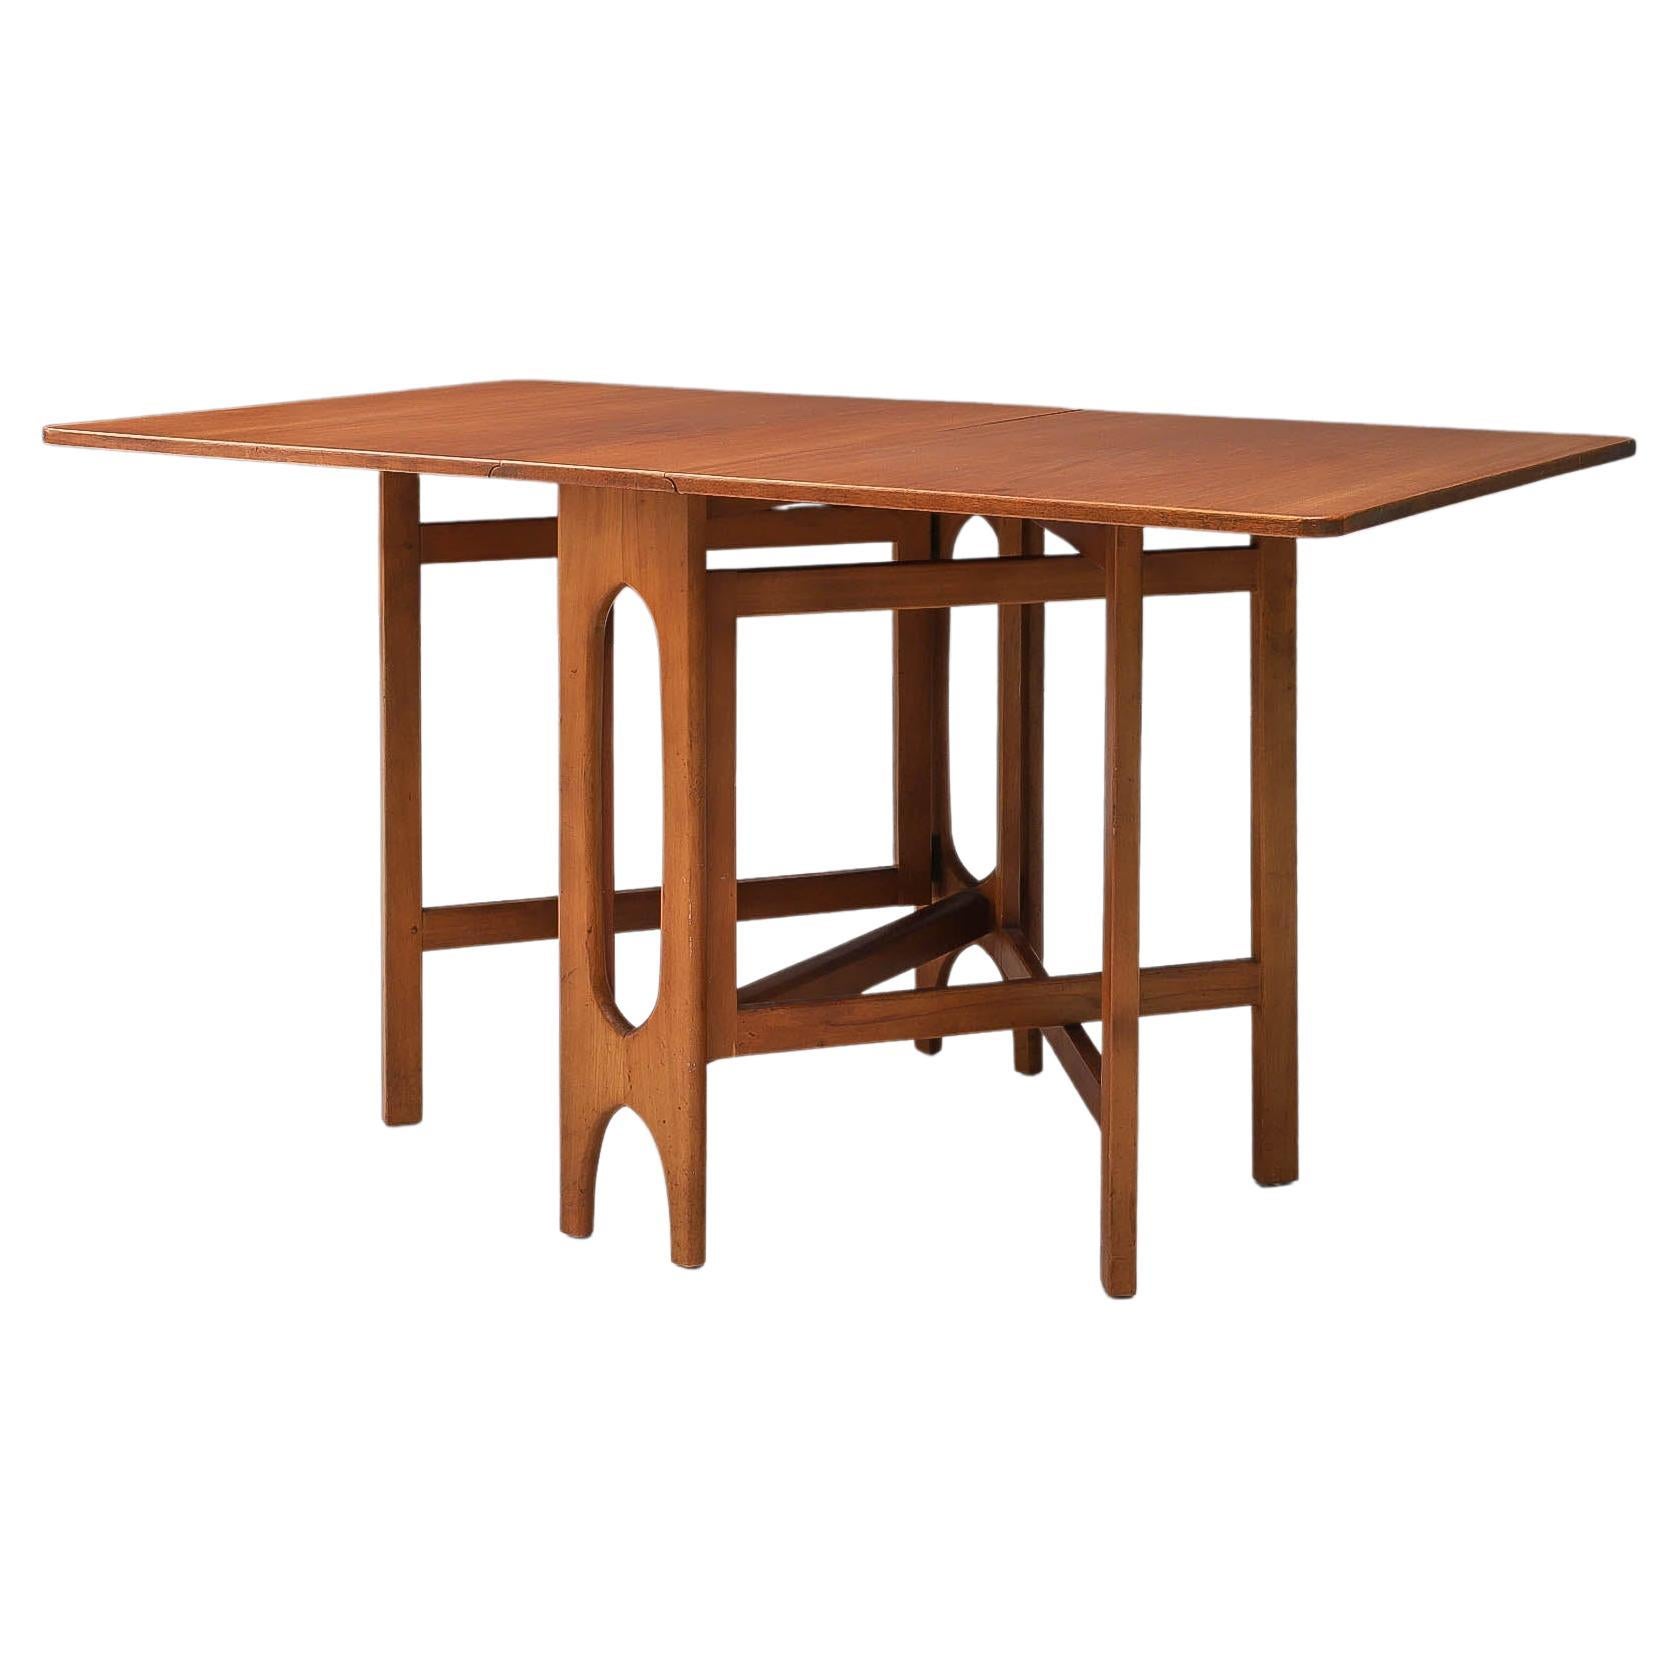 Sculptural Dining Table with Two Drop Leaves in Teak, Denmark, 1960's For Sale